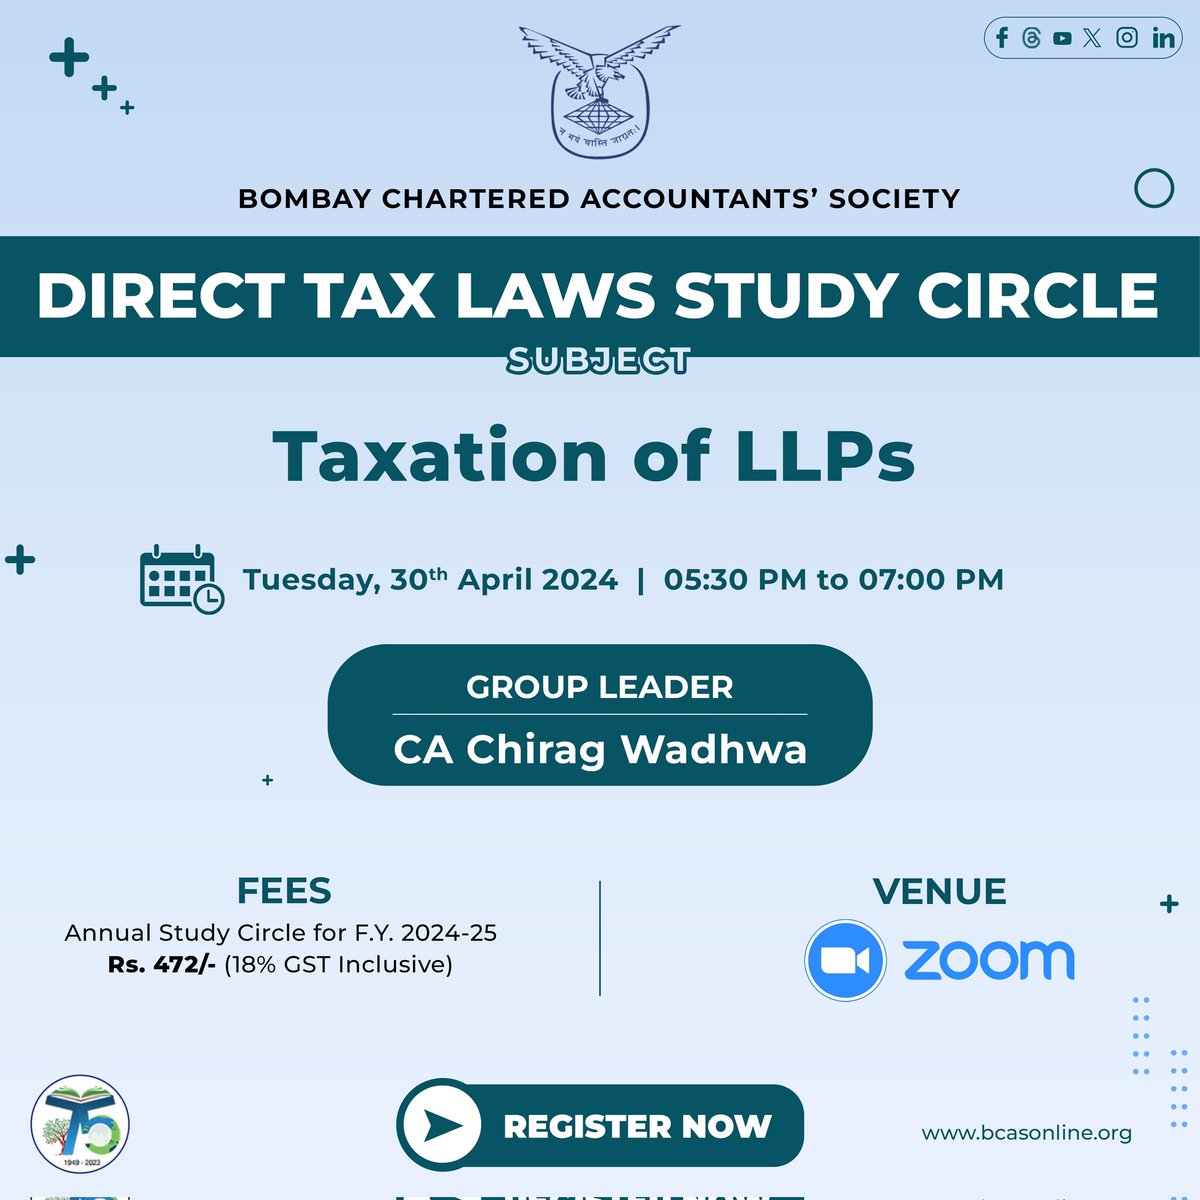 Dive Deep into LLP Taxation: Upcoming Study Circle Sessions! Calling all BCAS members! The Direct Tax Laws Study Circle is hosting an informative session: 🗓 Tuesday, April 30th, 2024 (5:30 PM - 7:00 PM): Taxation of LLPs (Led by CA Chirag Wadhwa) (1/2)